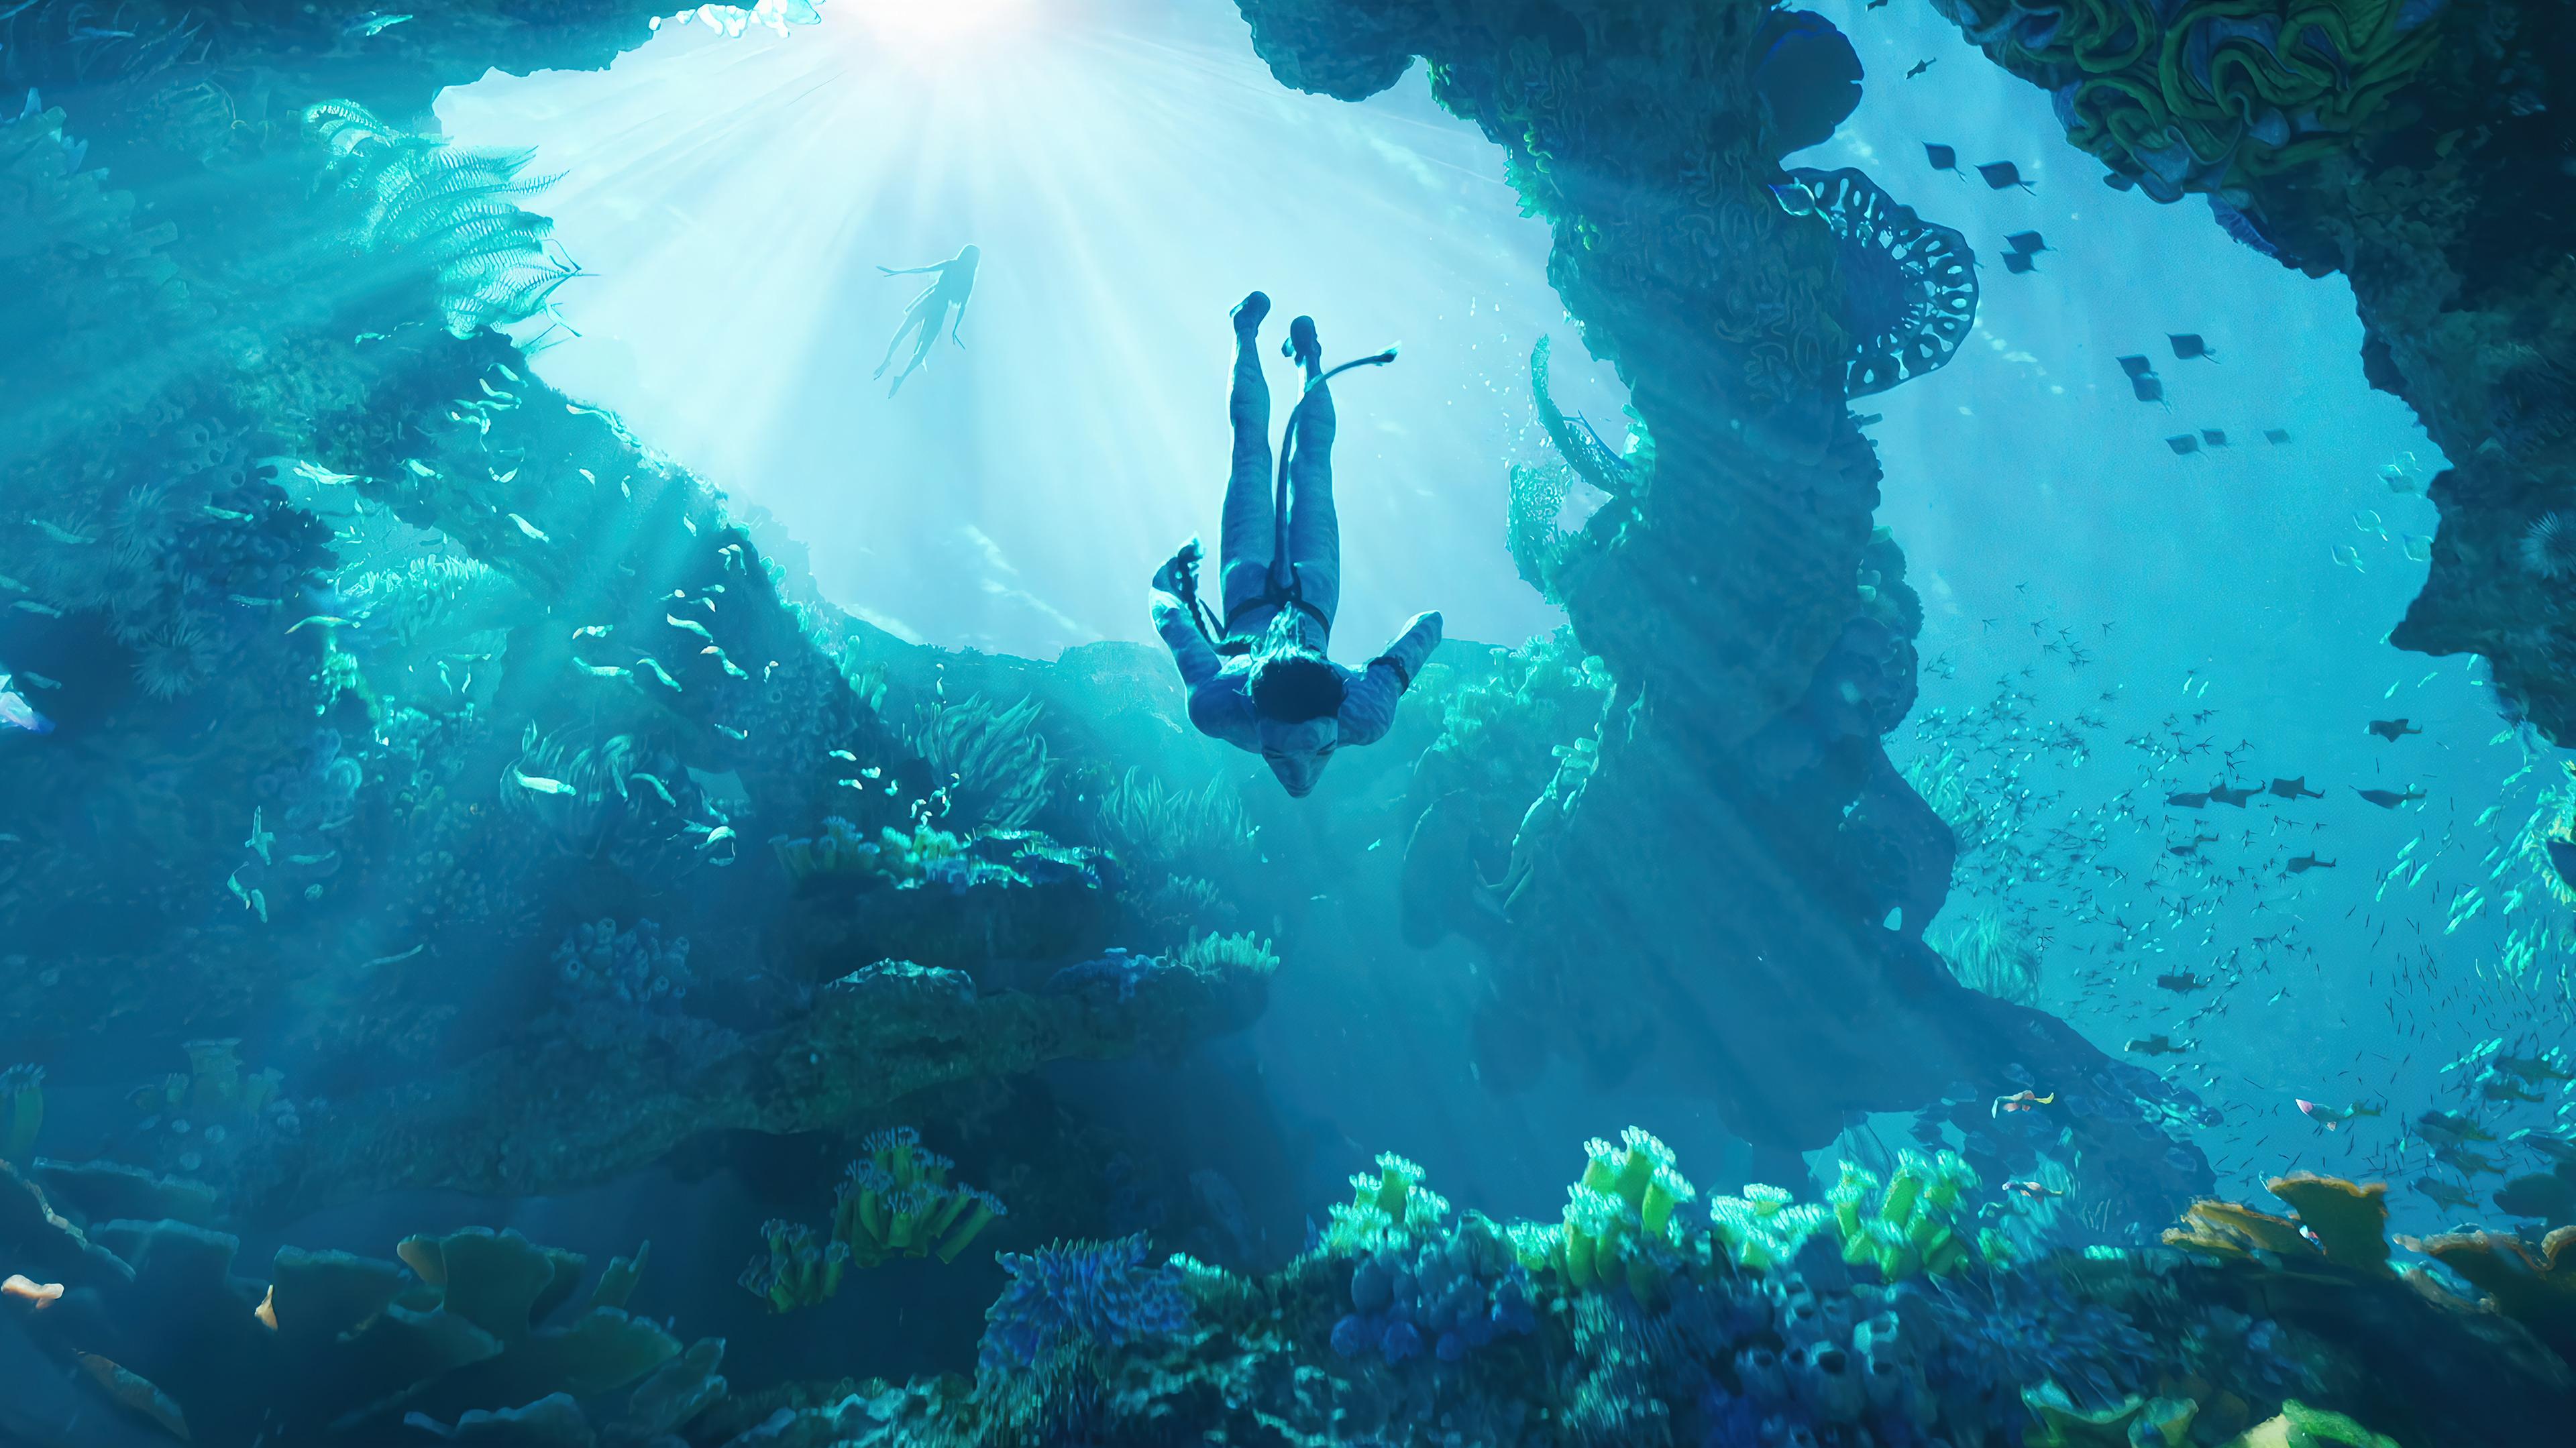 Avatar The Way of the Water Underwater Wallpaper 4K HD PC 5300h